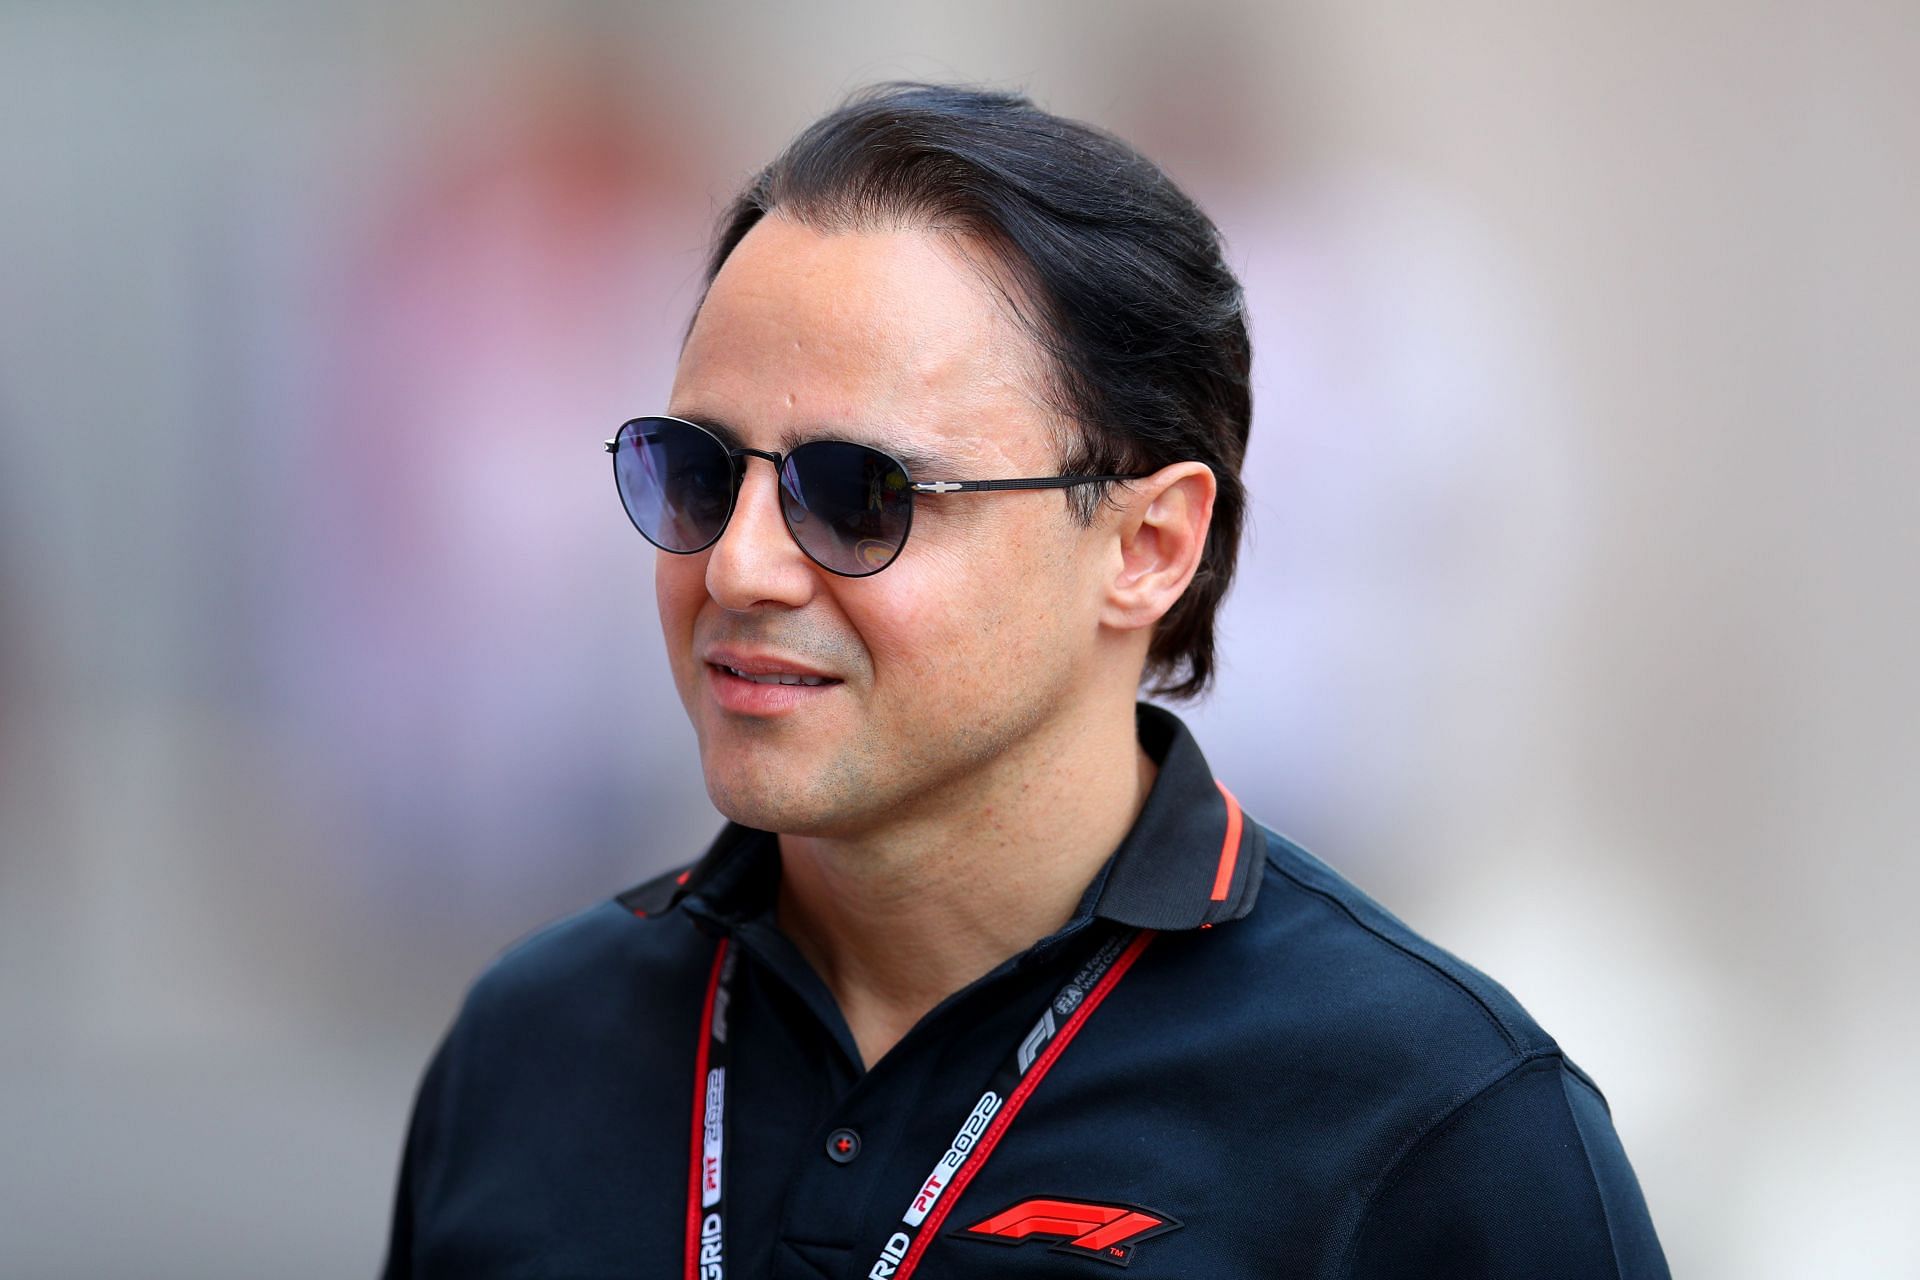 Felipe Massa feels Ferrari needs to sort out reliability first before looking at the drivers.